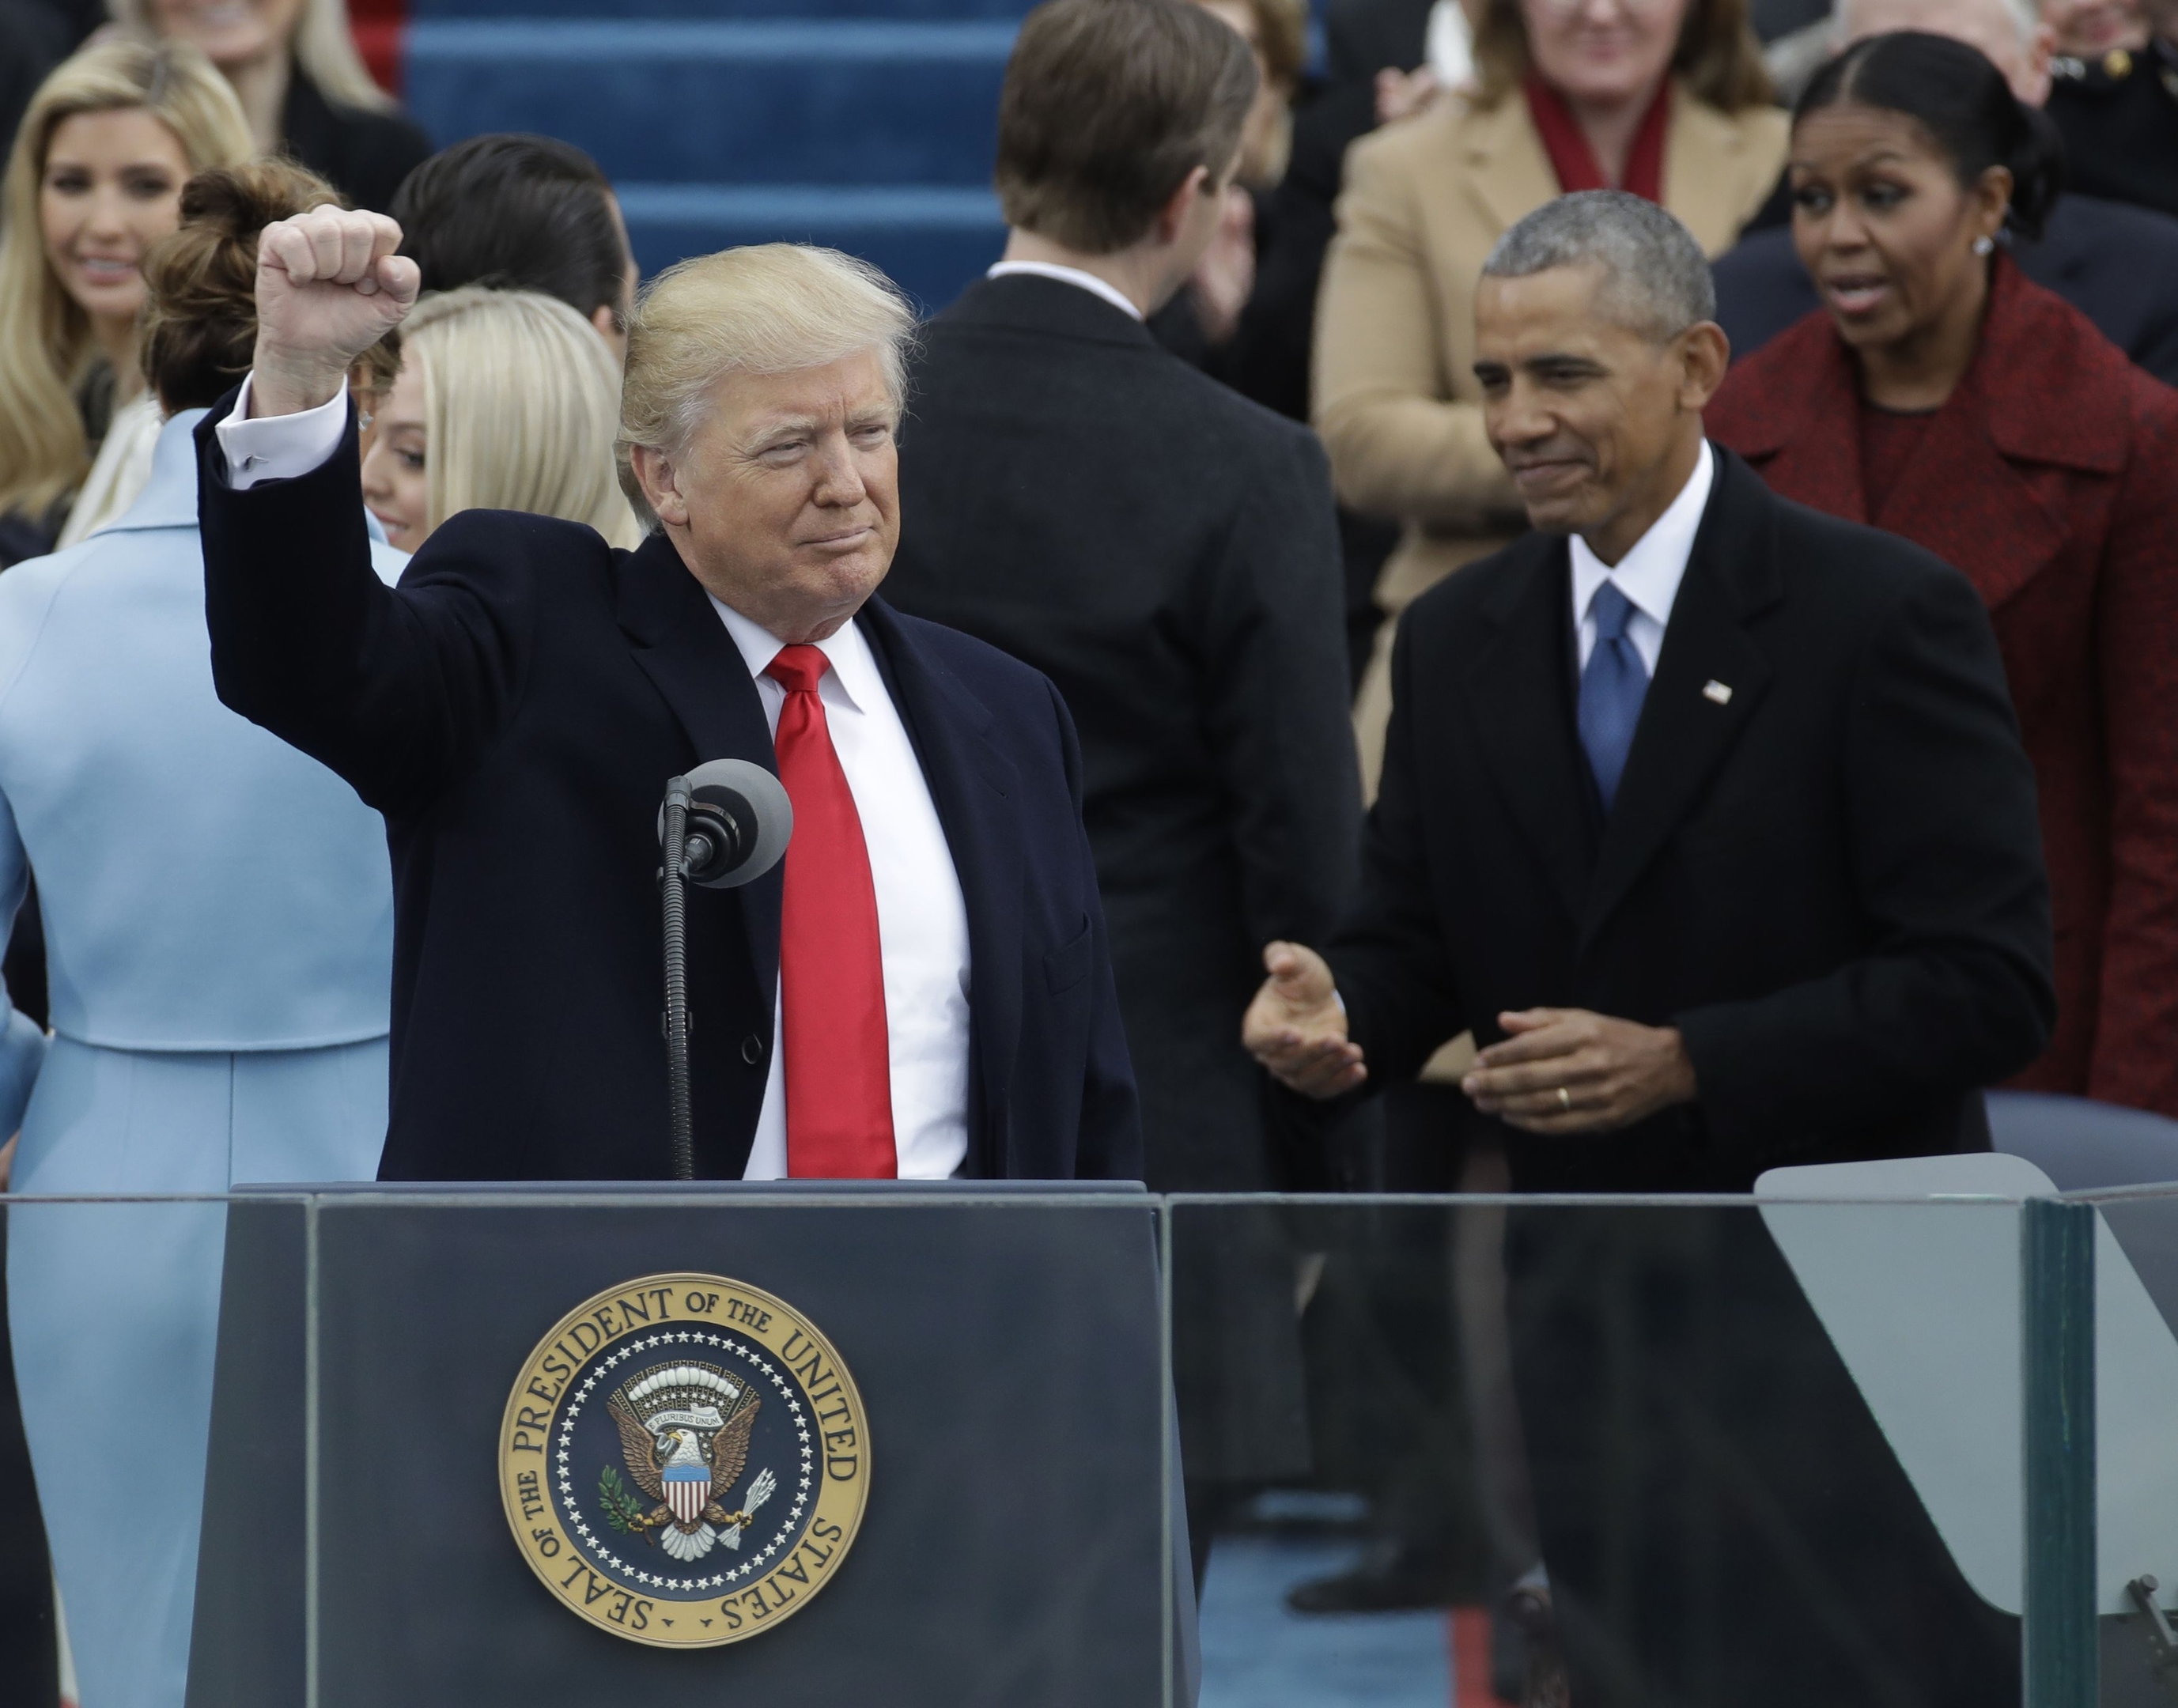 President Donald Trump waves after being sworn in as the 45th president of the United States